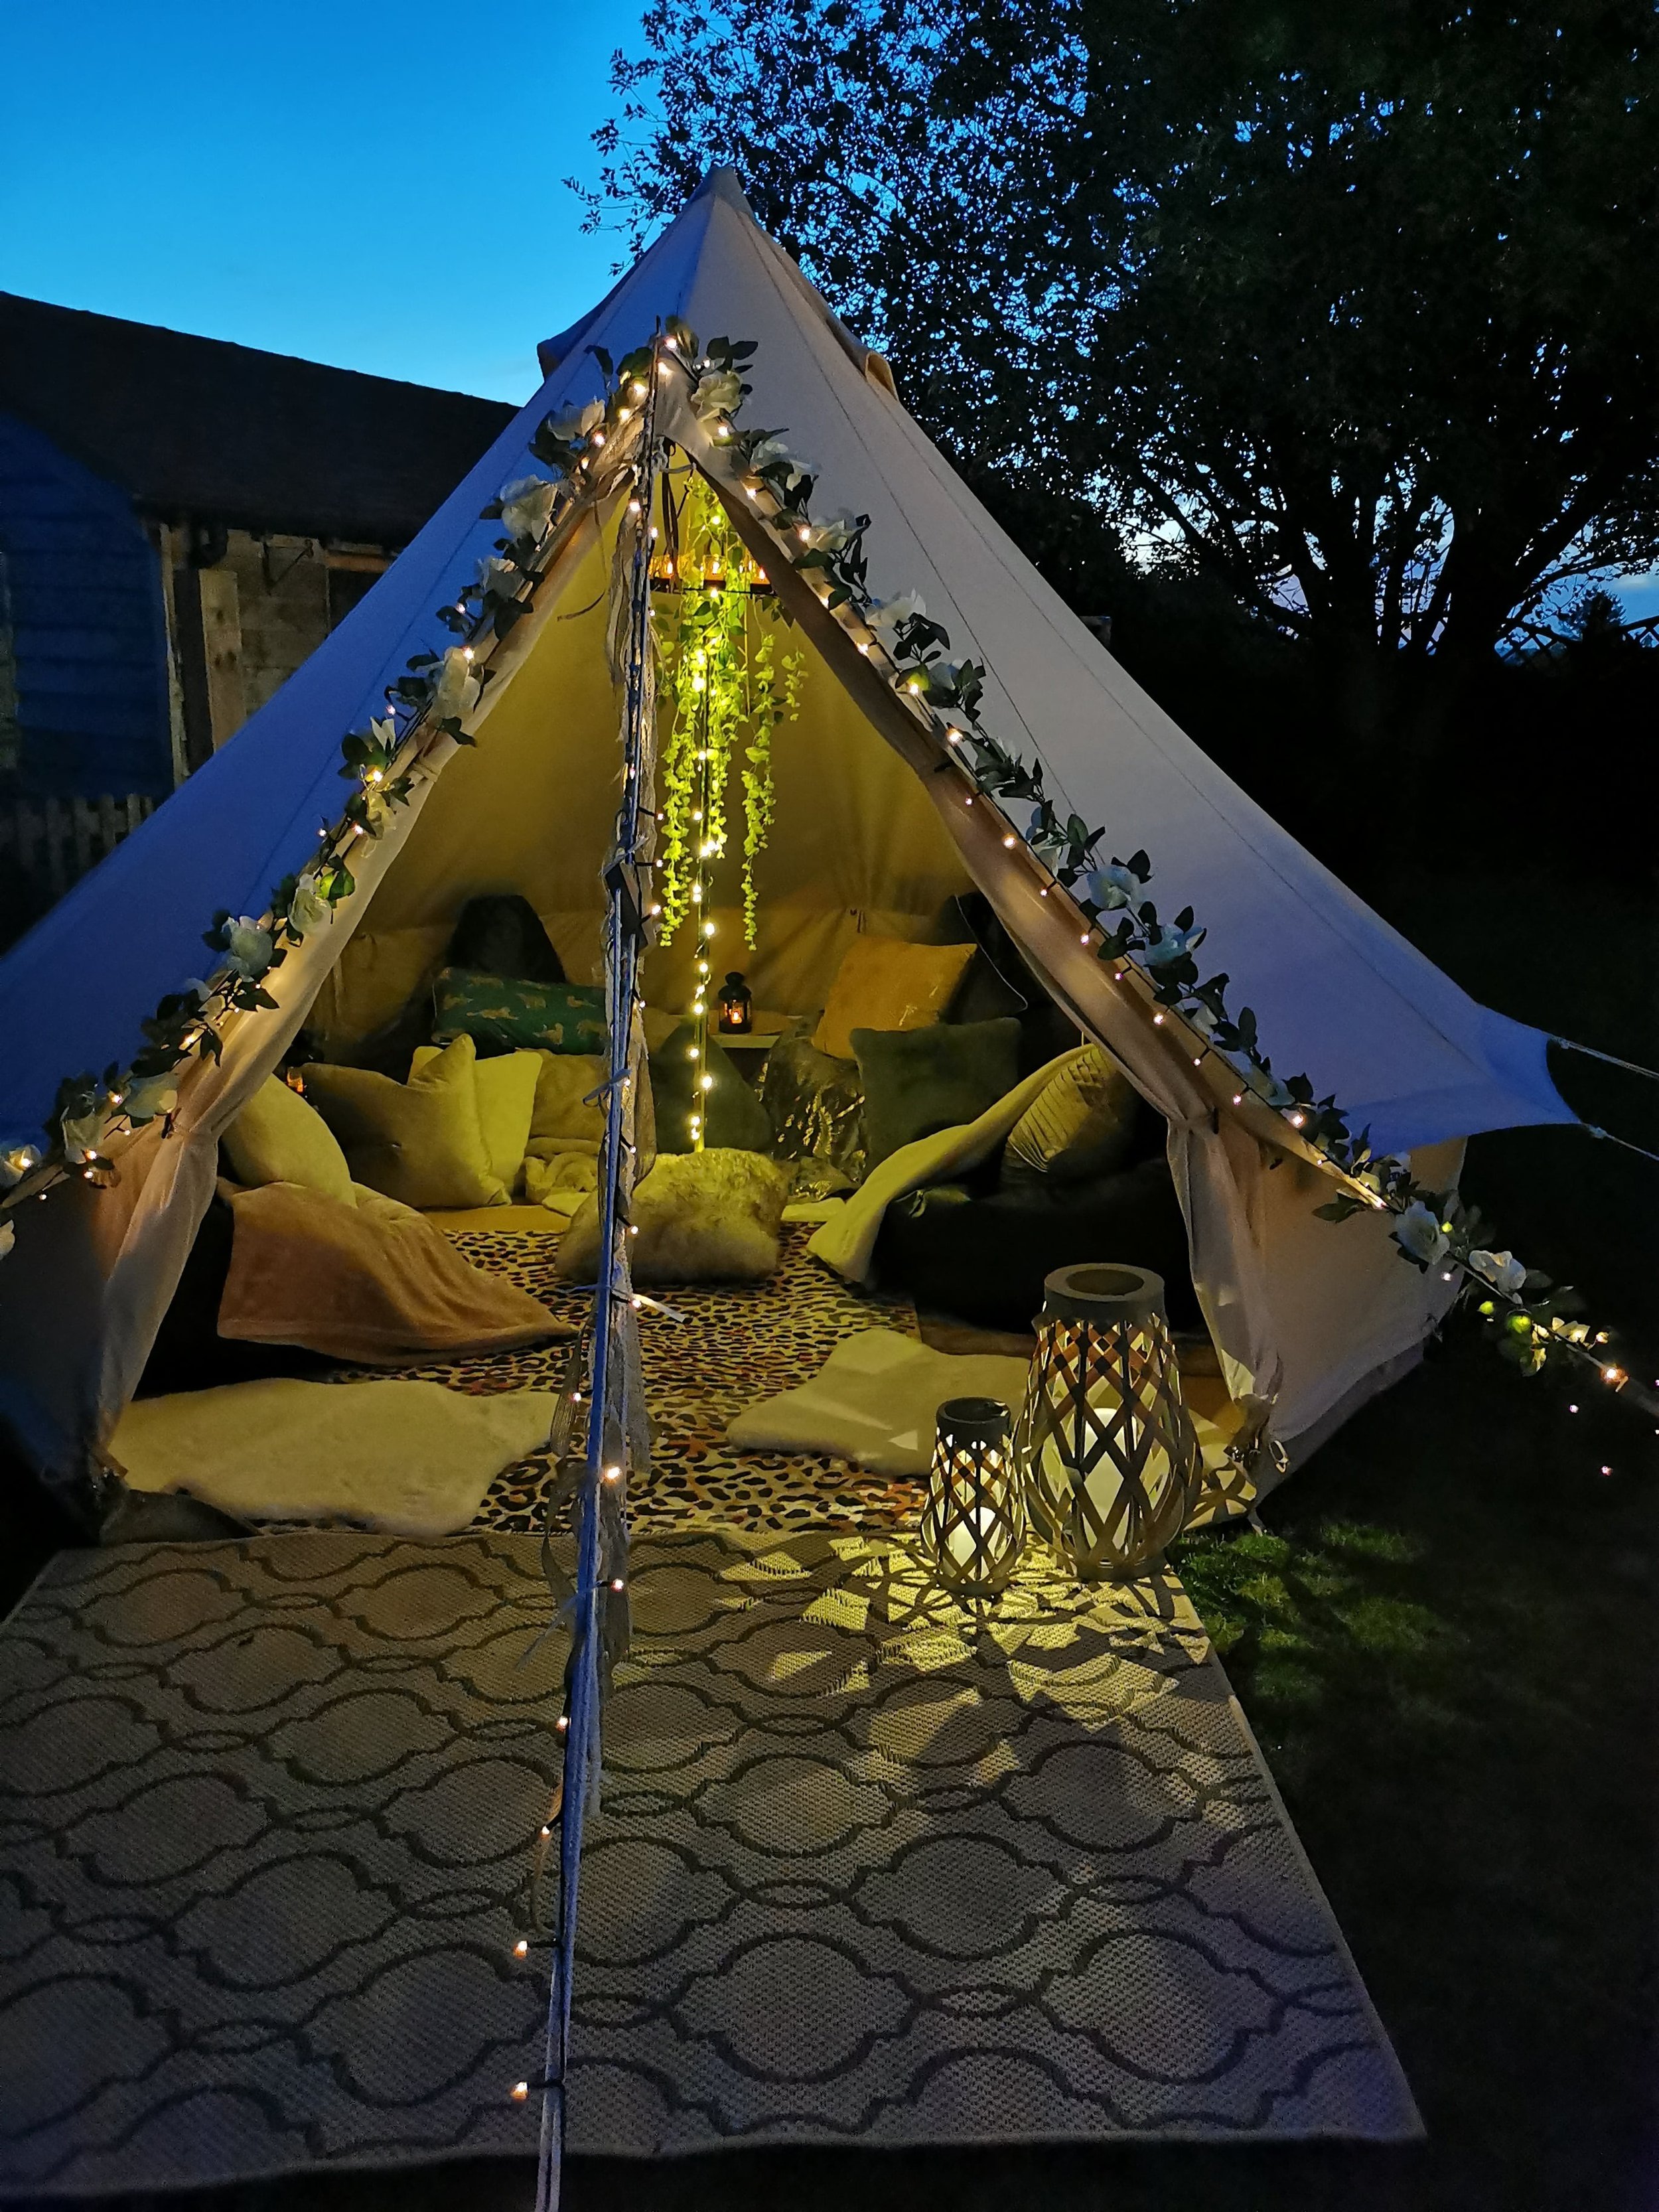 Glampees- Sleepover Party Tents in Hampshire